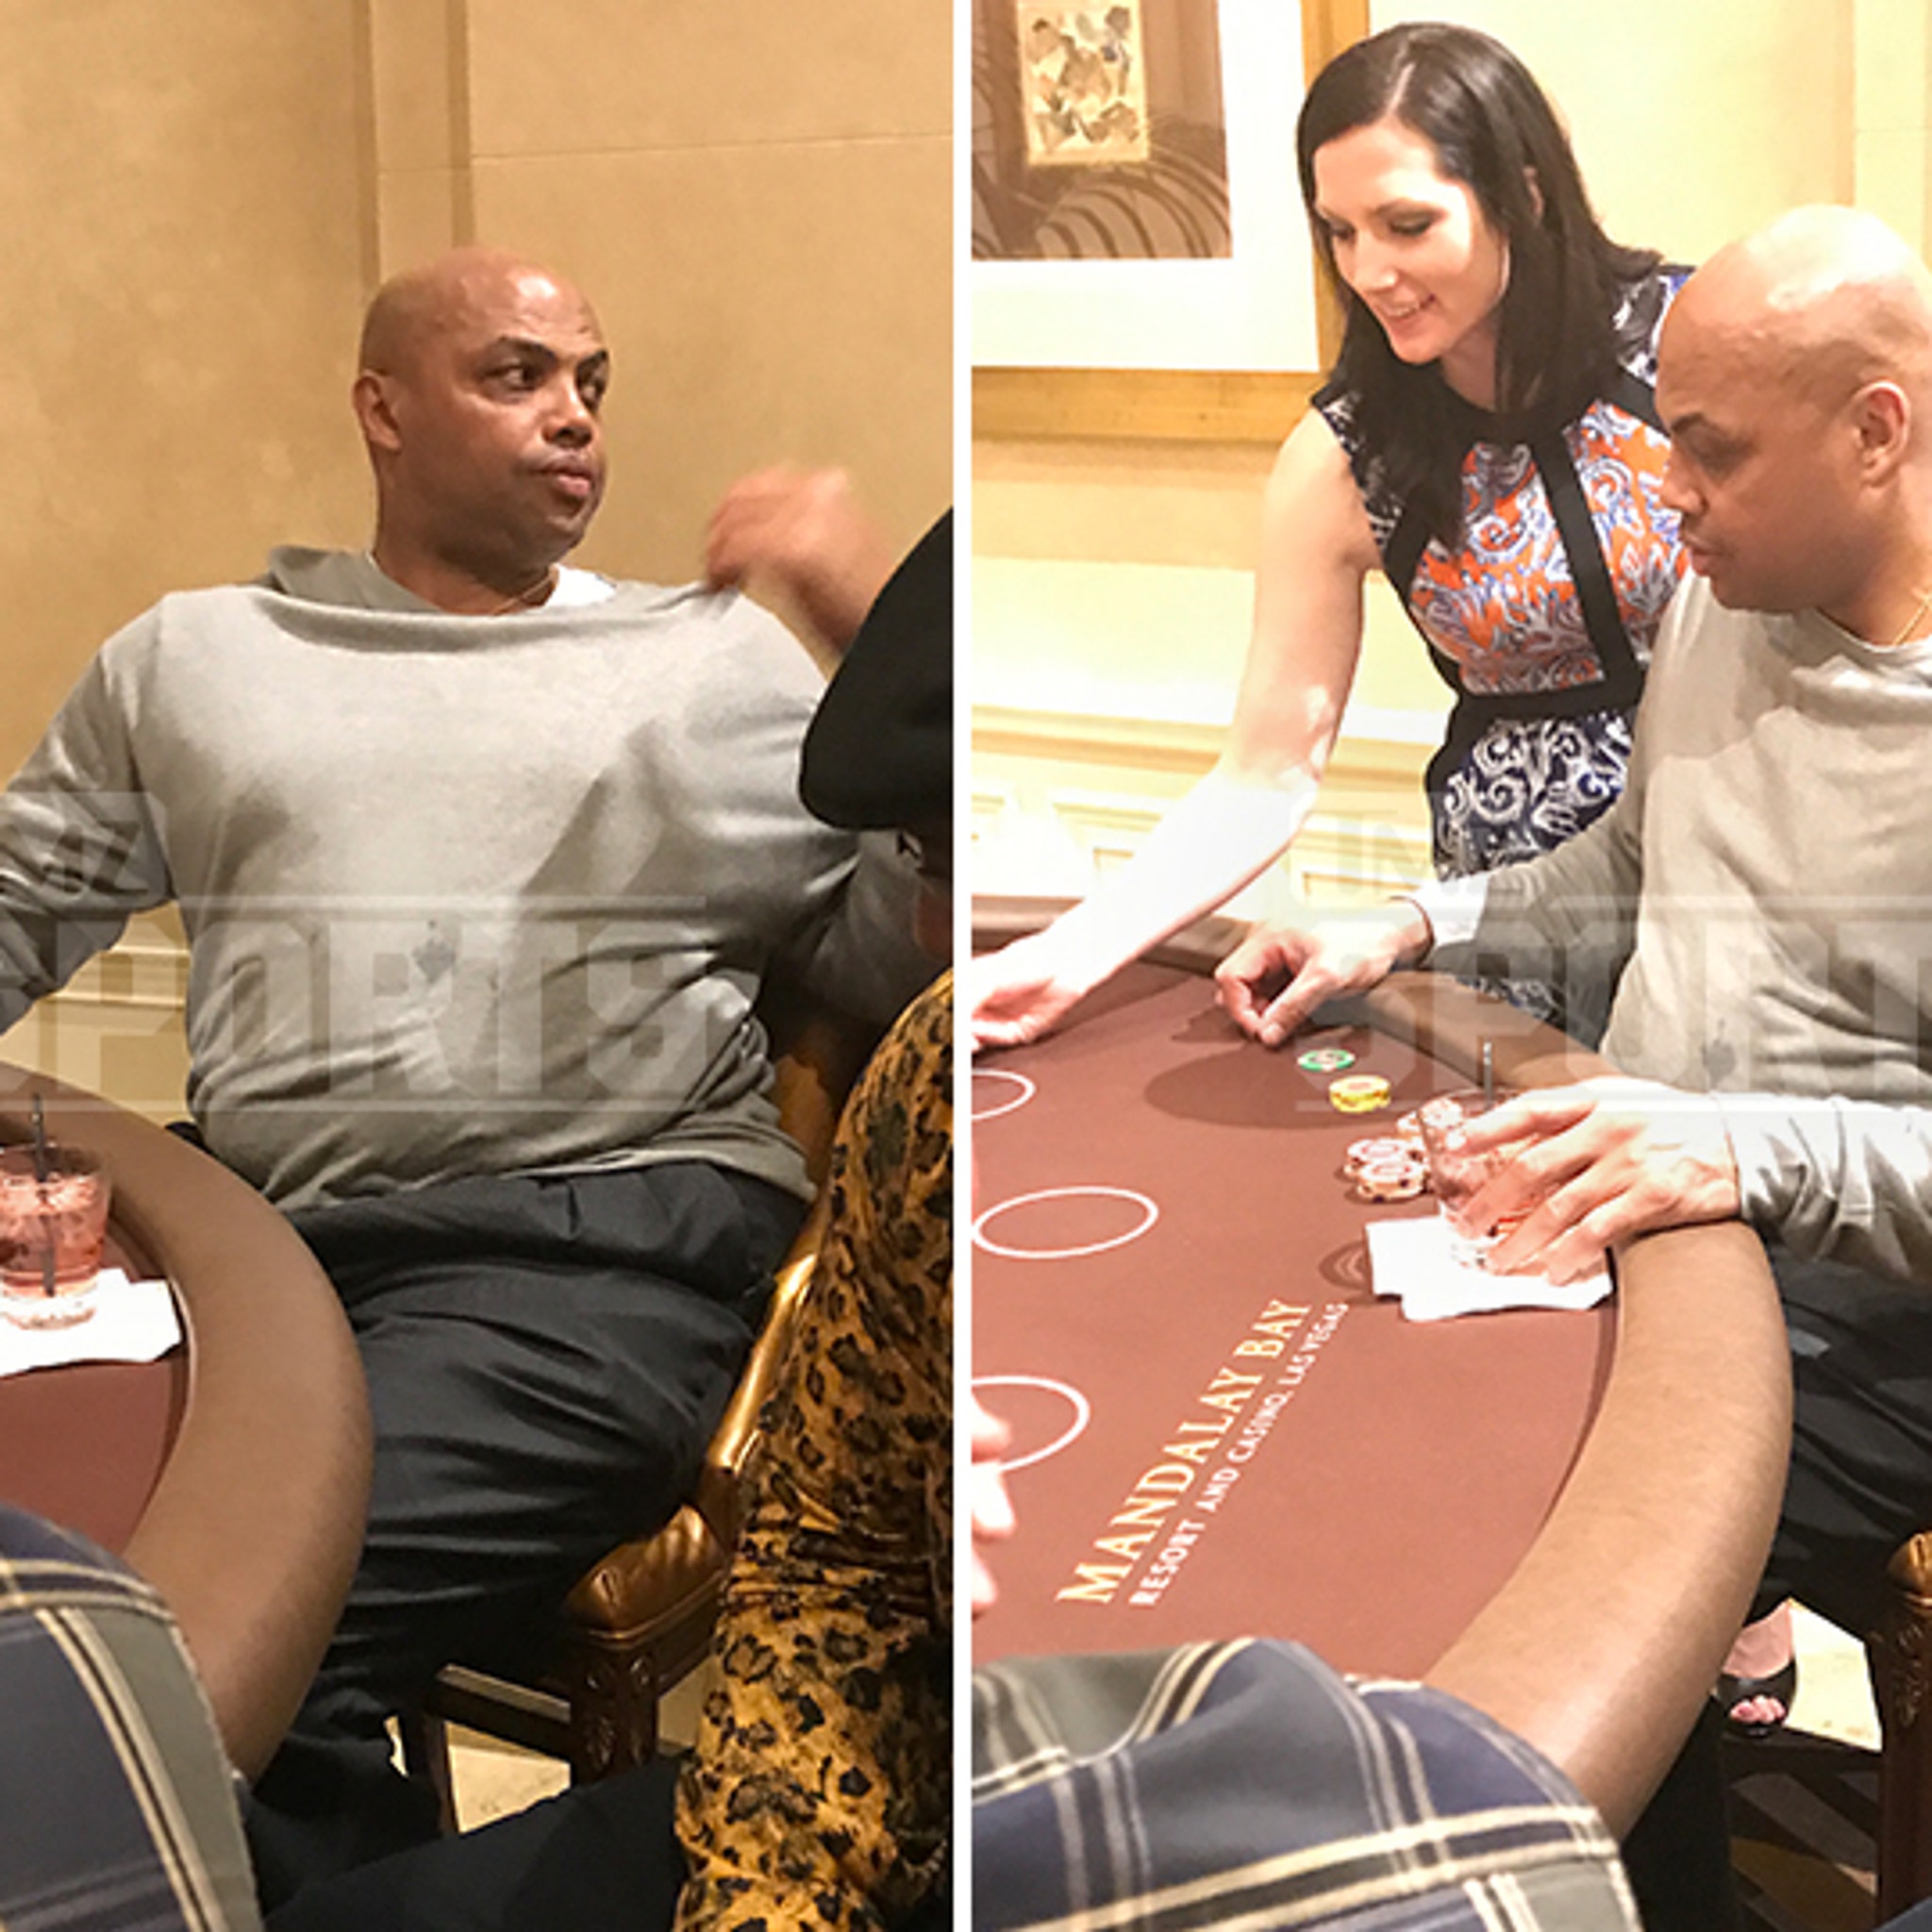 Sports betting: Charles Barkley says there is too much gambling